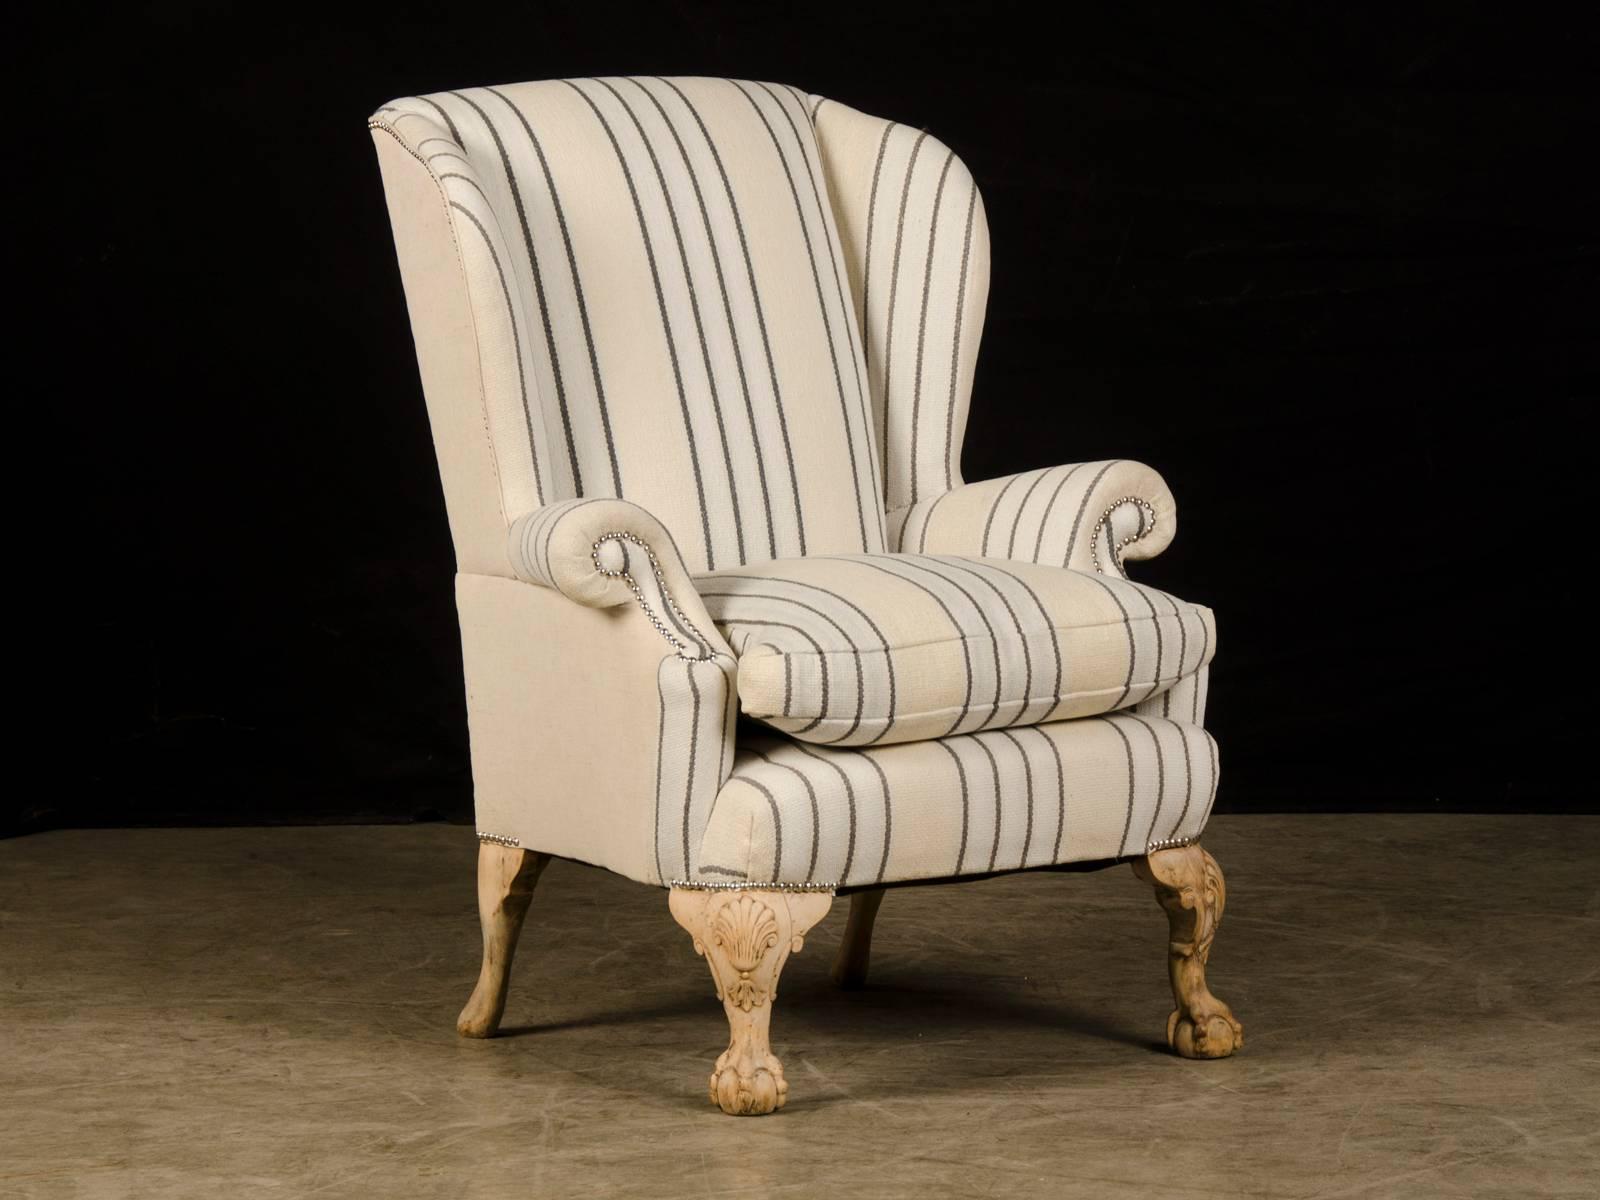 Receive our new selections direct from 1stdibs by email each week. Please click Follow Dealer below and see them first!

A Chippendale style antique English wing chair circa 1880. This terrific armchair has been updated for the 21st century by